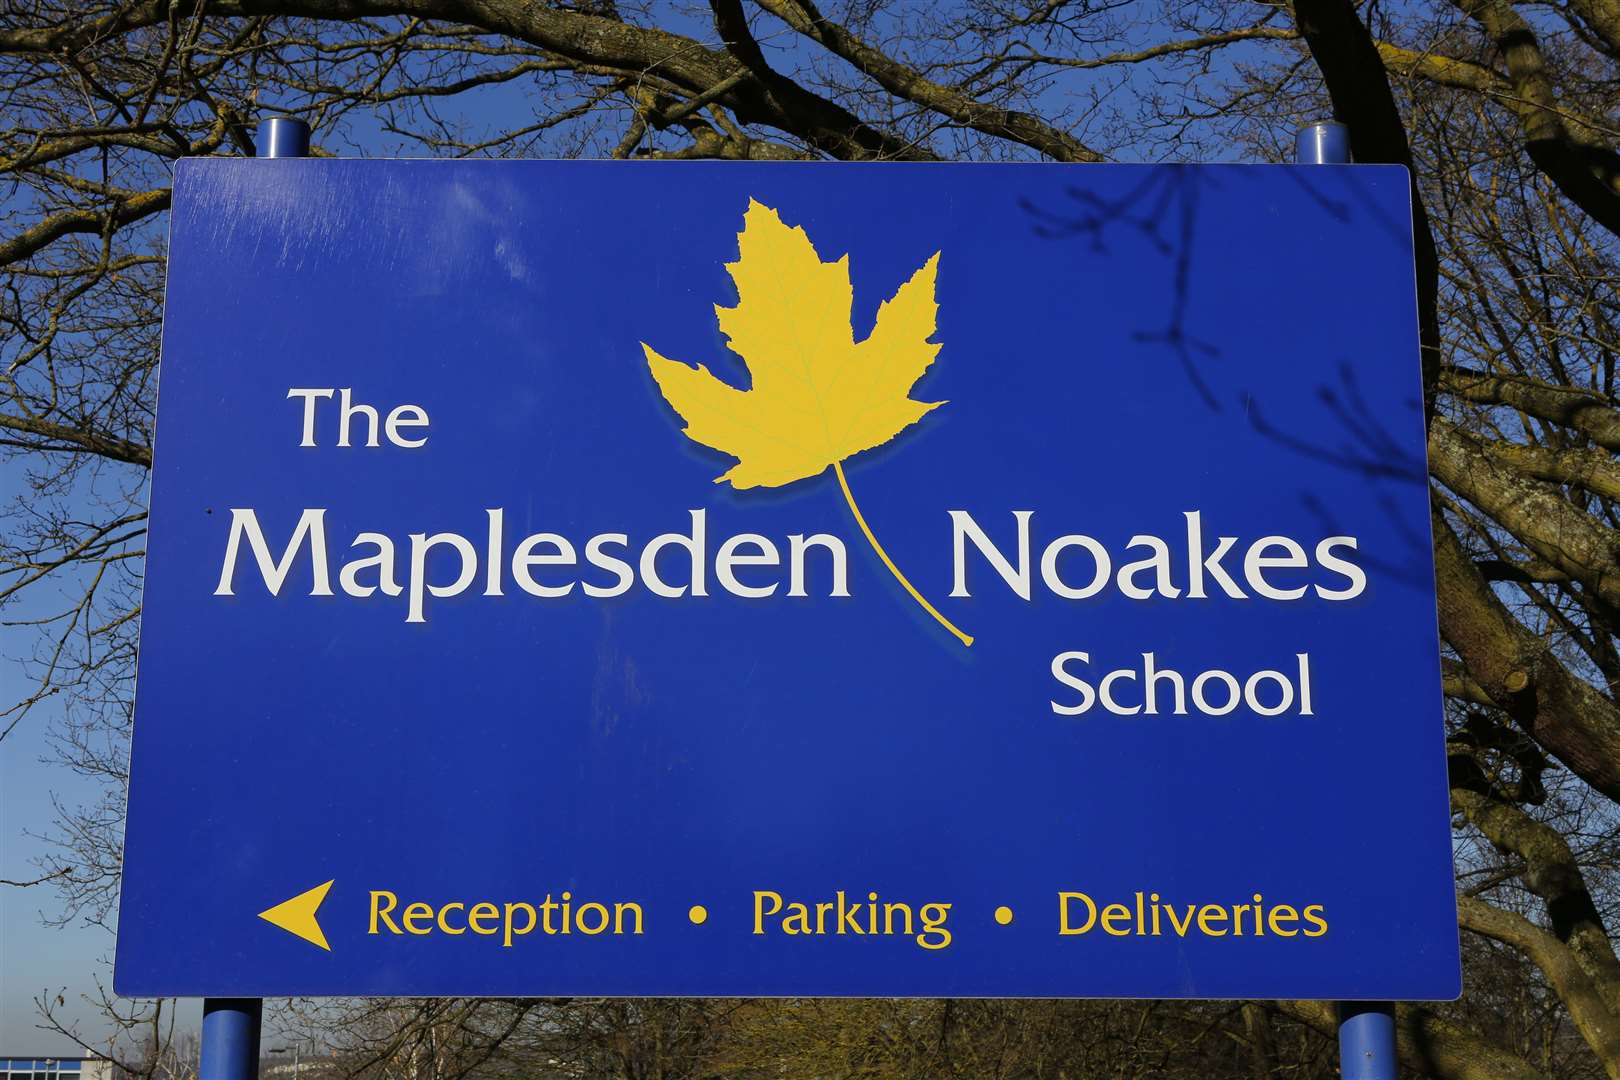 Maplesden Noakes School is to expand